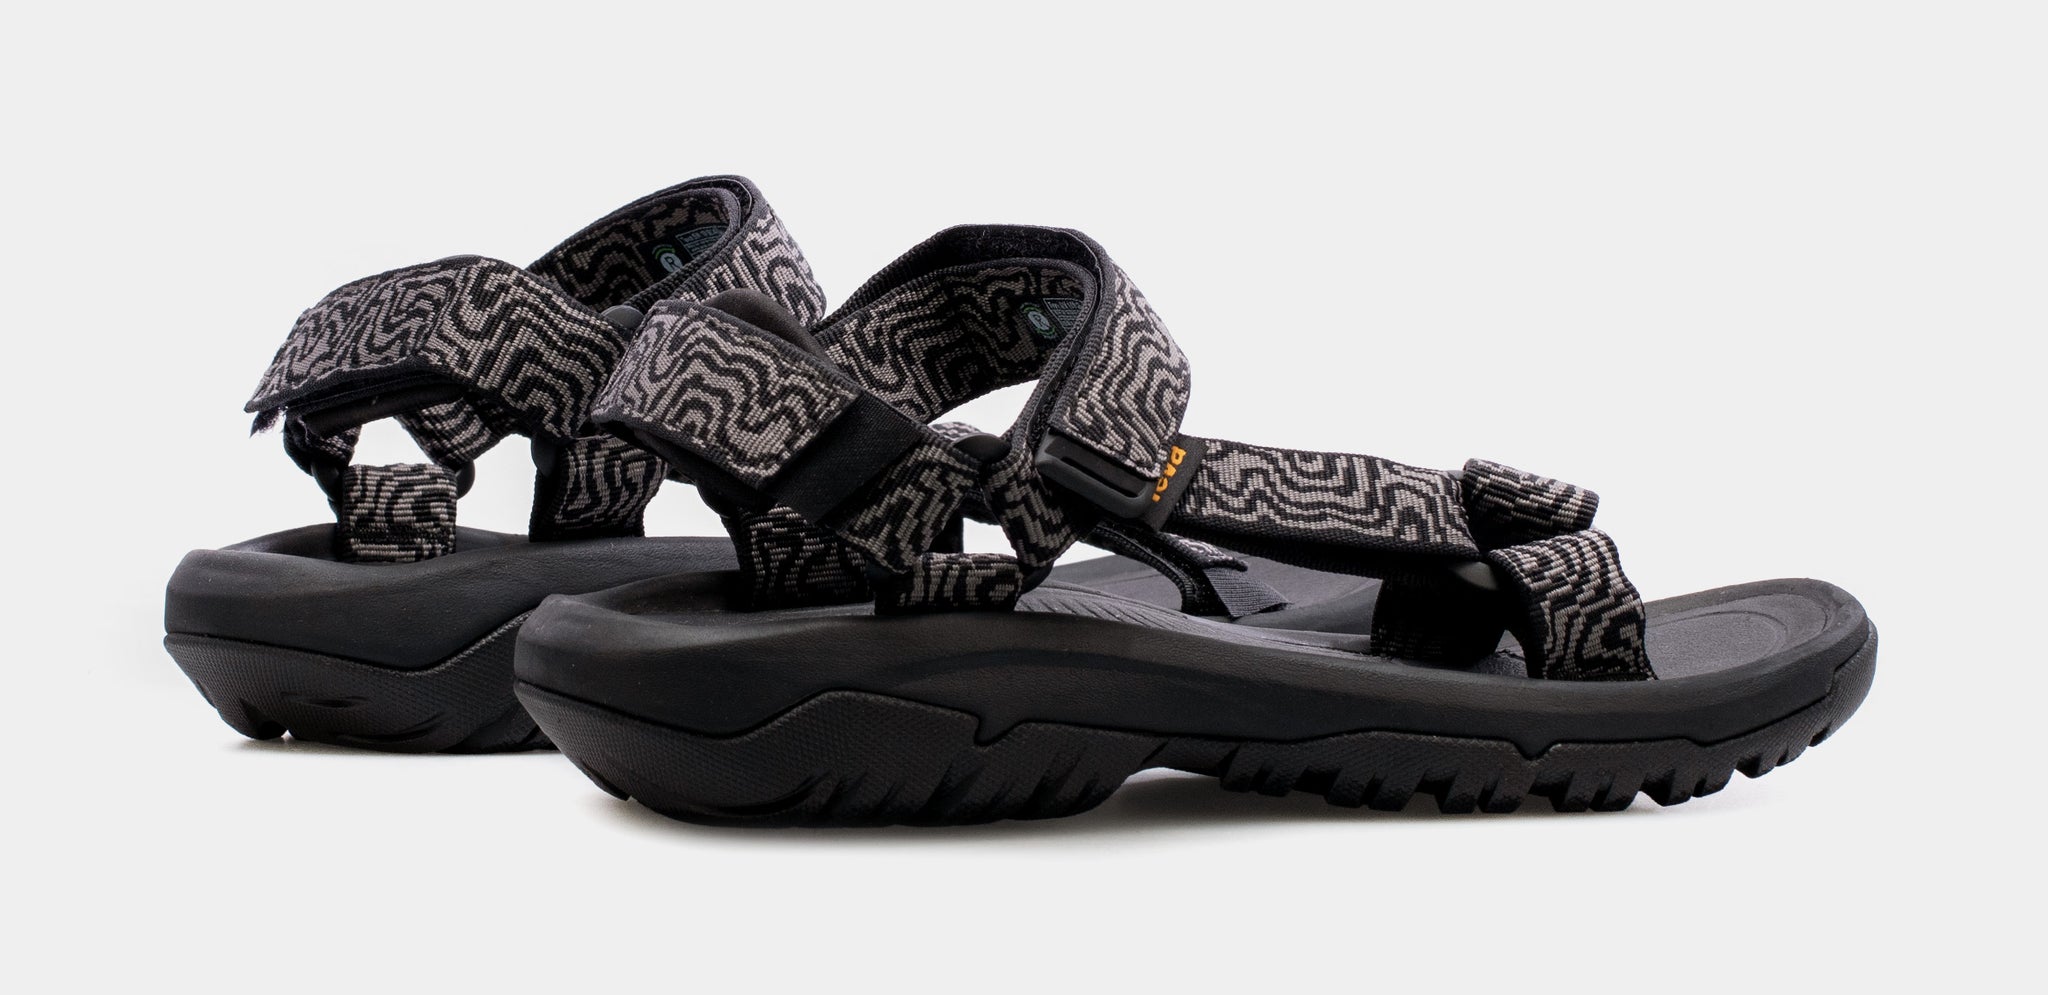 Hurricane Sandals Collection | Teva® Official